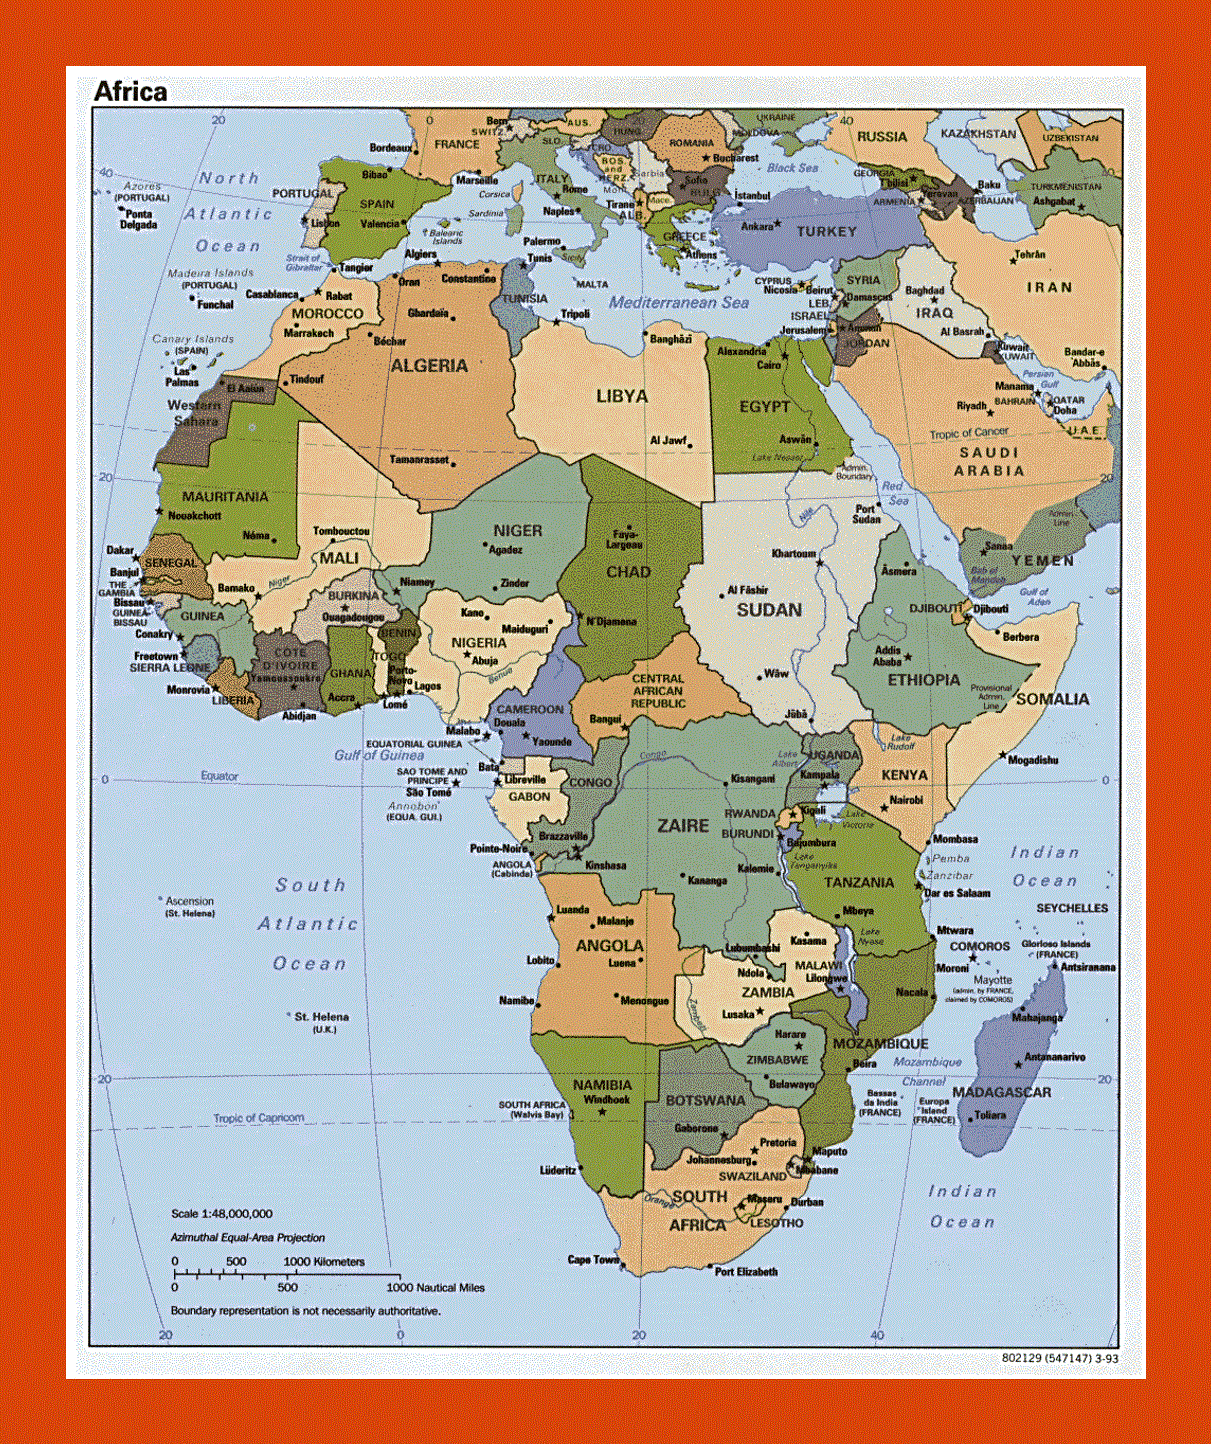 Political map of Africa - 1993